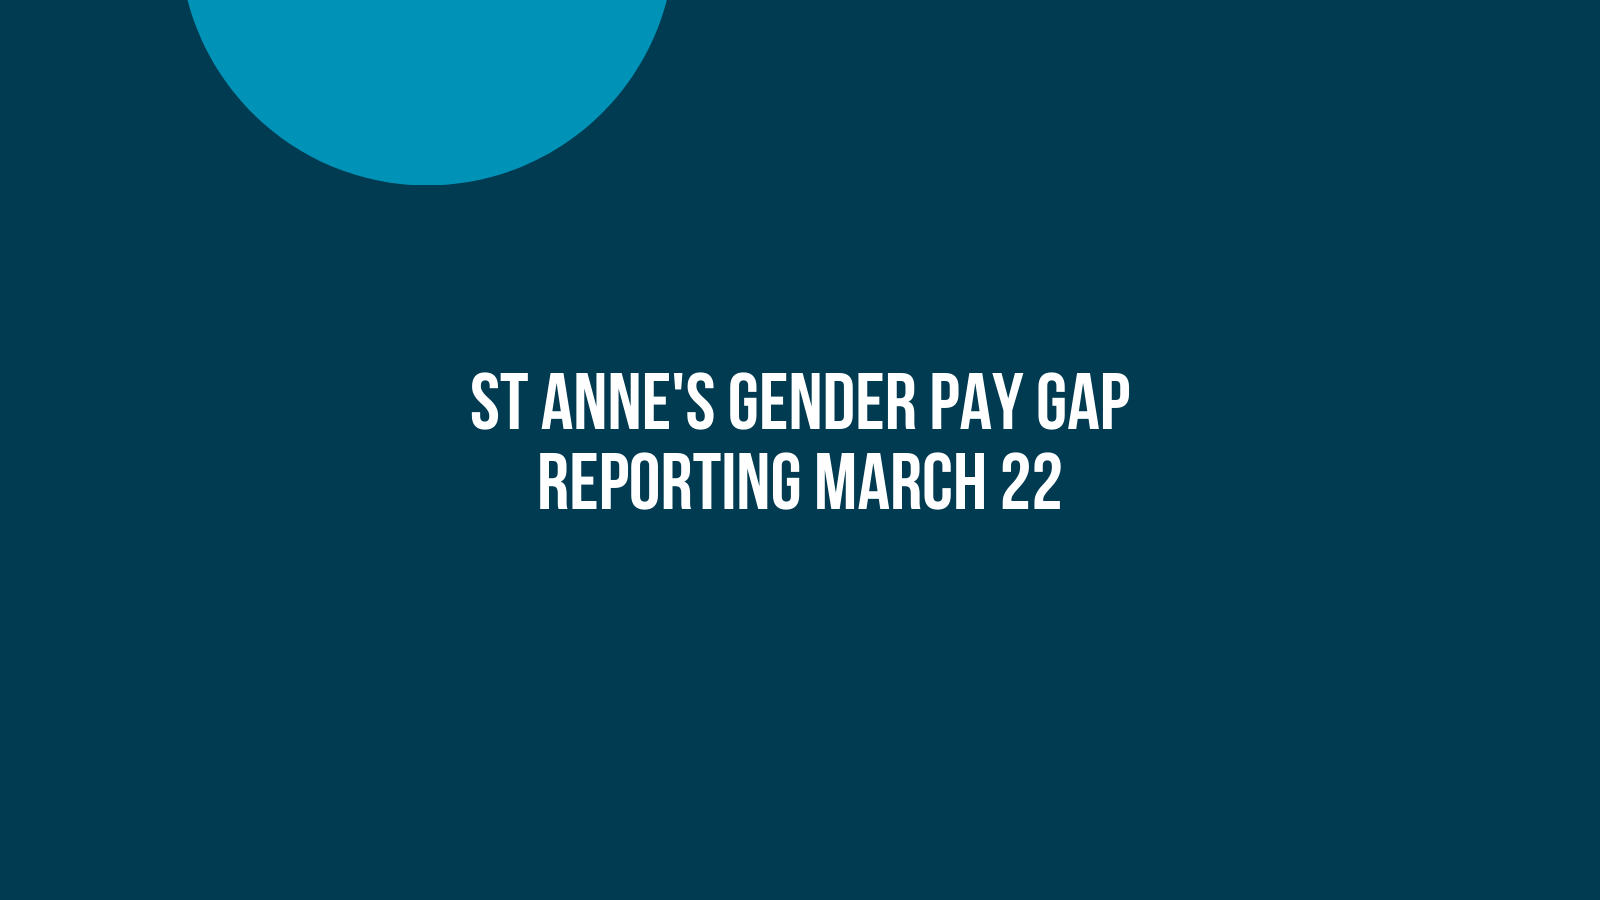 St Anne’s Gender Pay Gap Reporting March 22